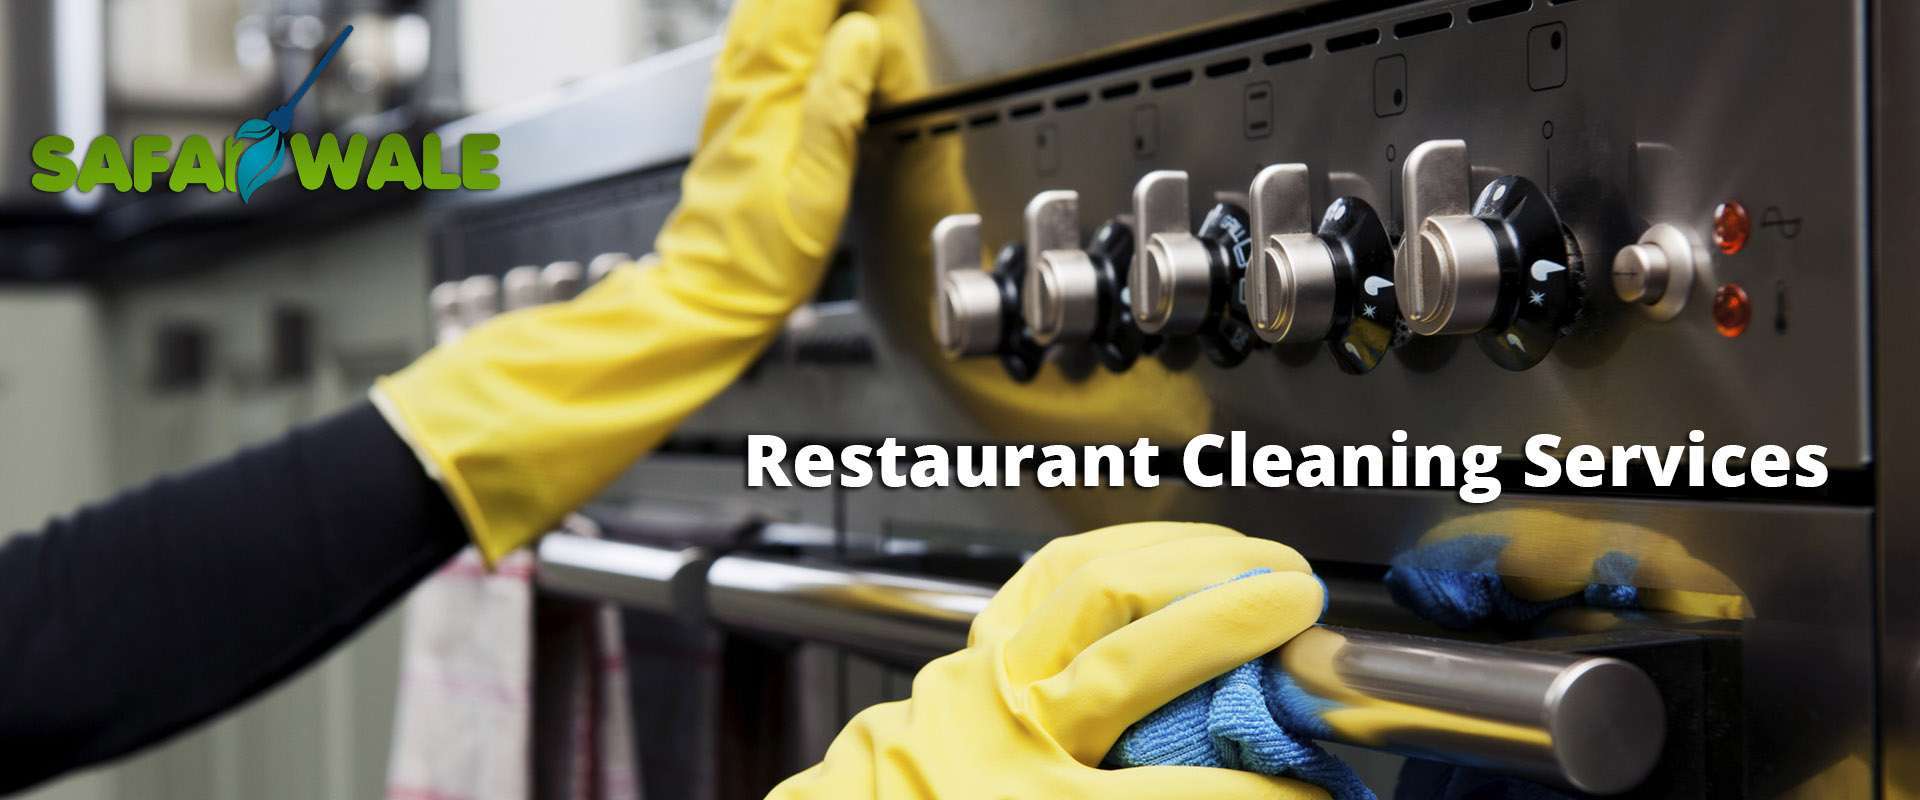 restaurant cleaning services in Goa